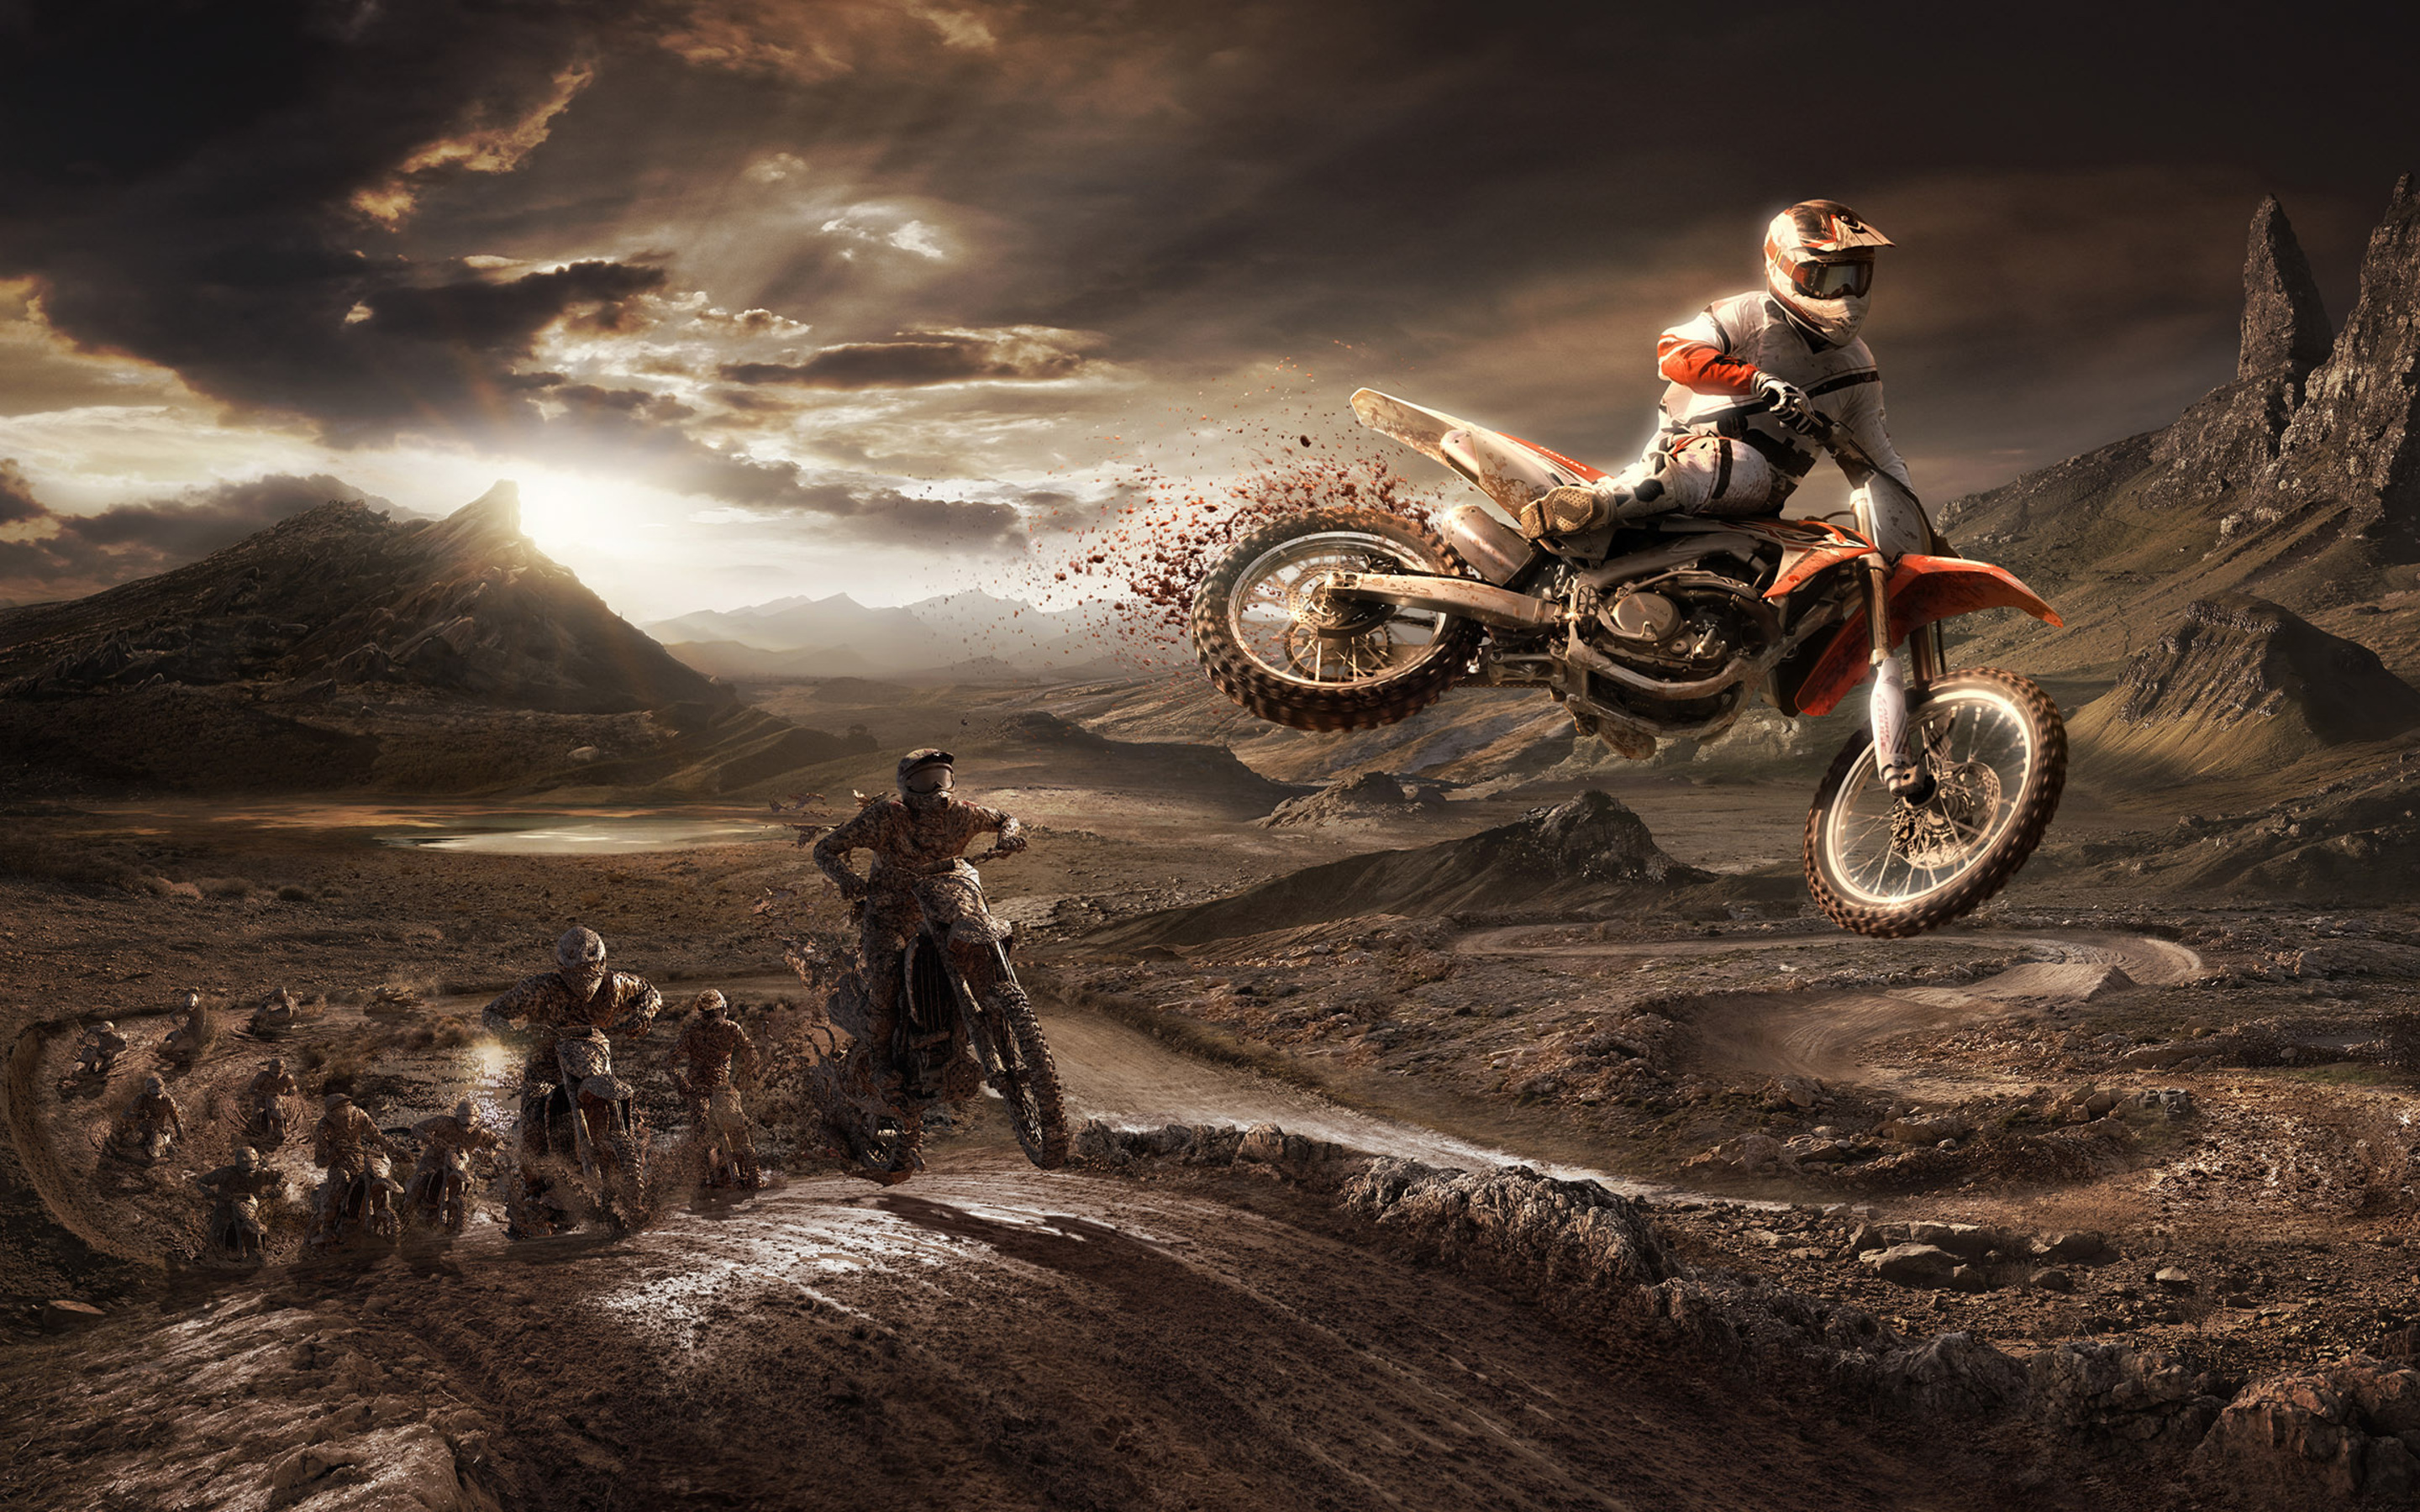 Download wallpaper Honda CRF450R, raceway, extreme, 2018 bikes, offroad, motorcycle jump, CRF450R, motocross, Honda for desktop with resolution 2880x1800. High Quality HD picture wallpaper